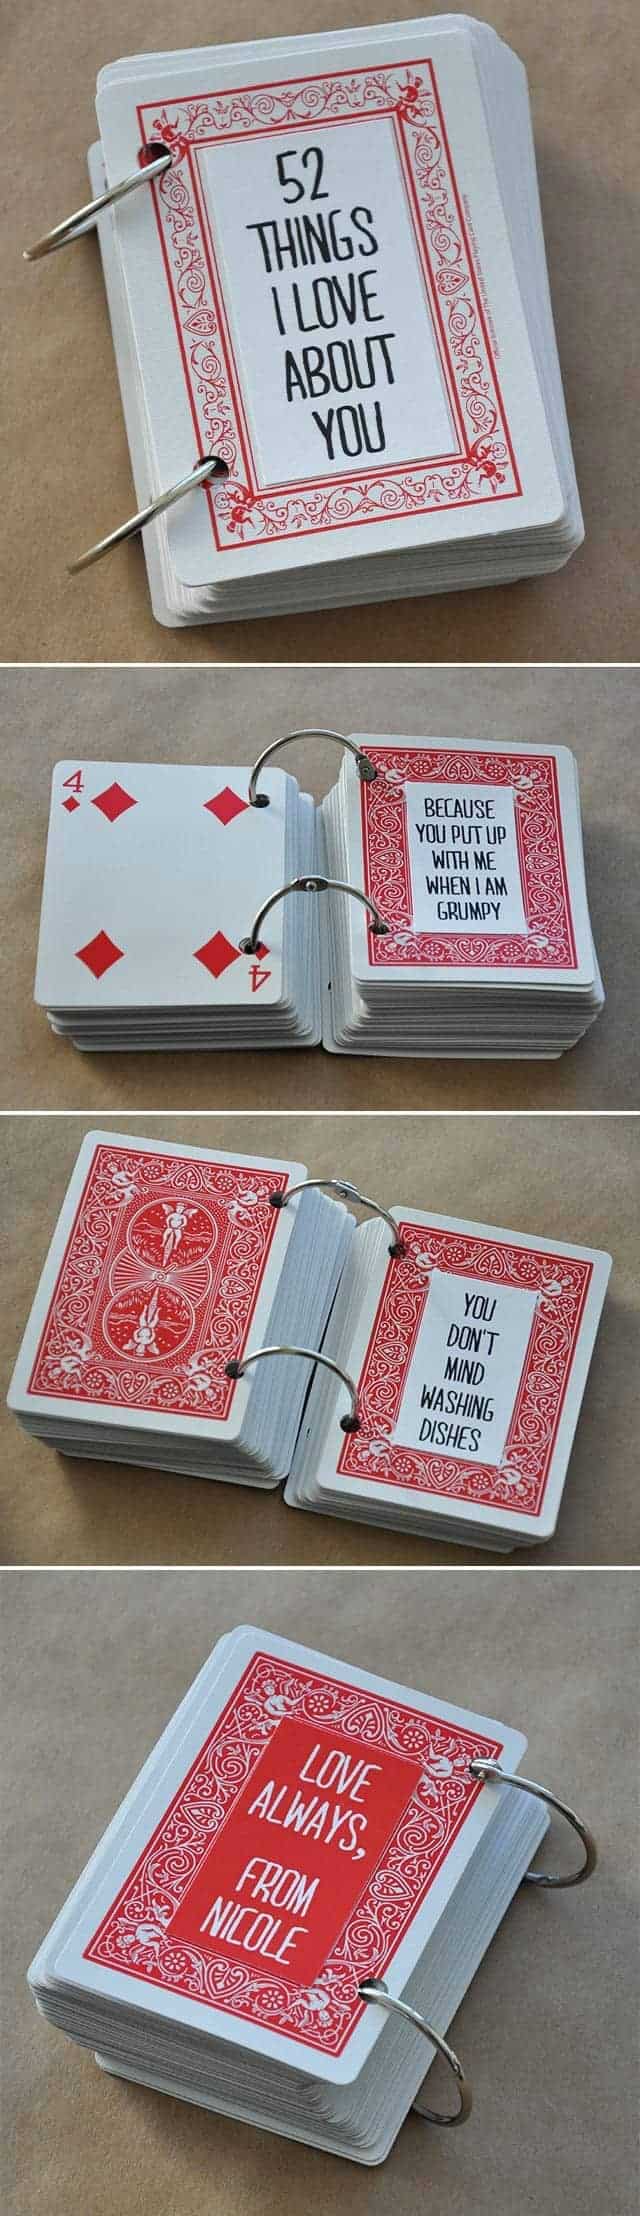 52 things I love about you cards